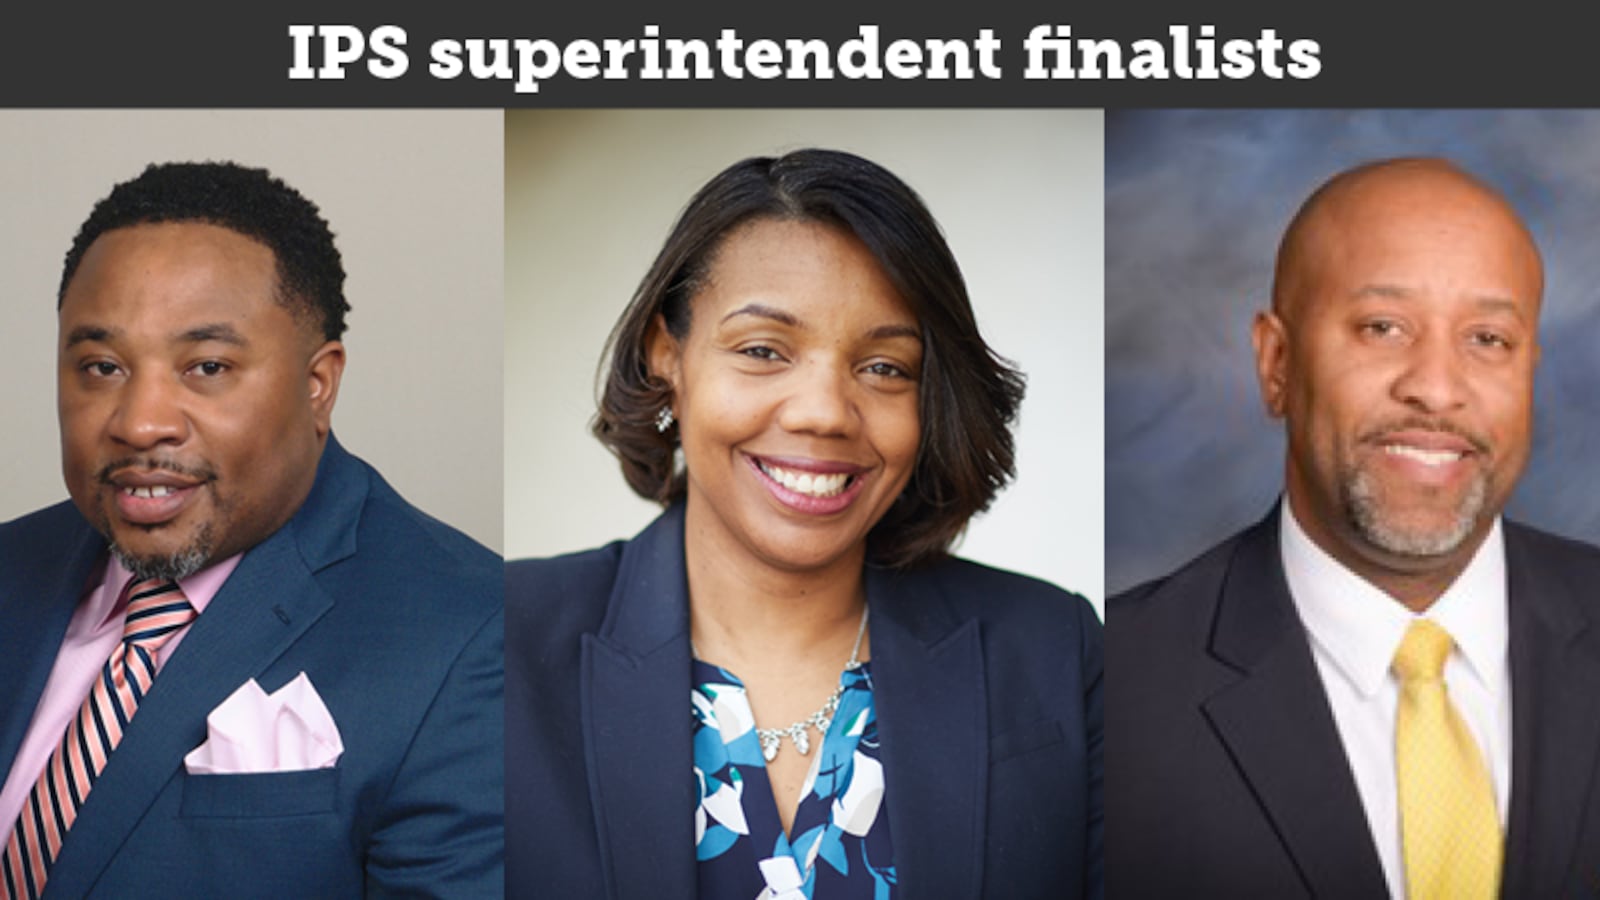 From left: Jefferson County Public Schools chief of schools Devon Horton, Indianapolis Public Schools interim Superintendent Aleesia Johnson, and Pike Township assistant superintendent Larry Young are the three finalists for IPS superintendent.